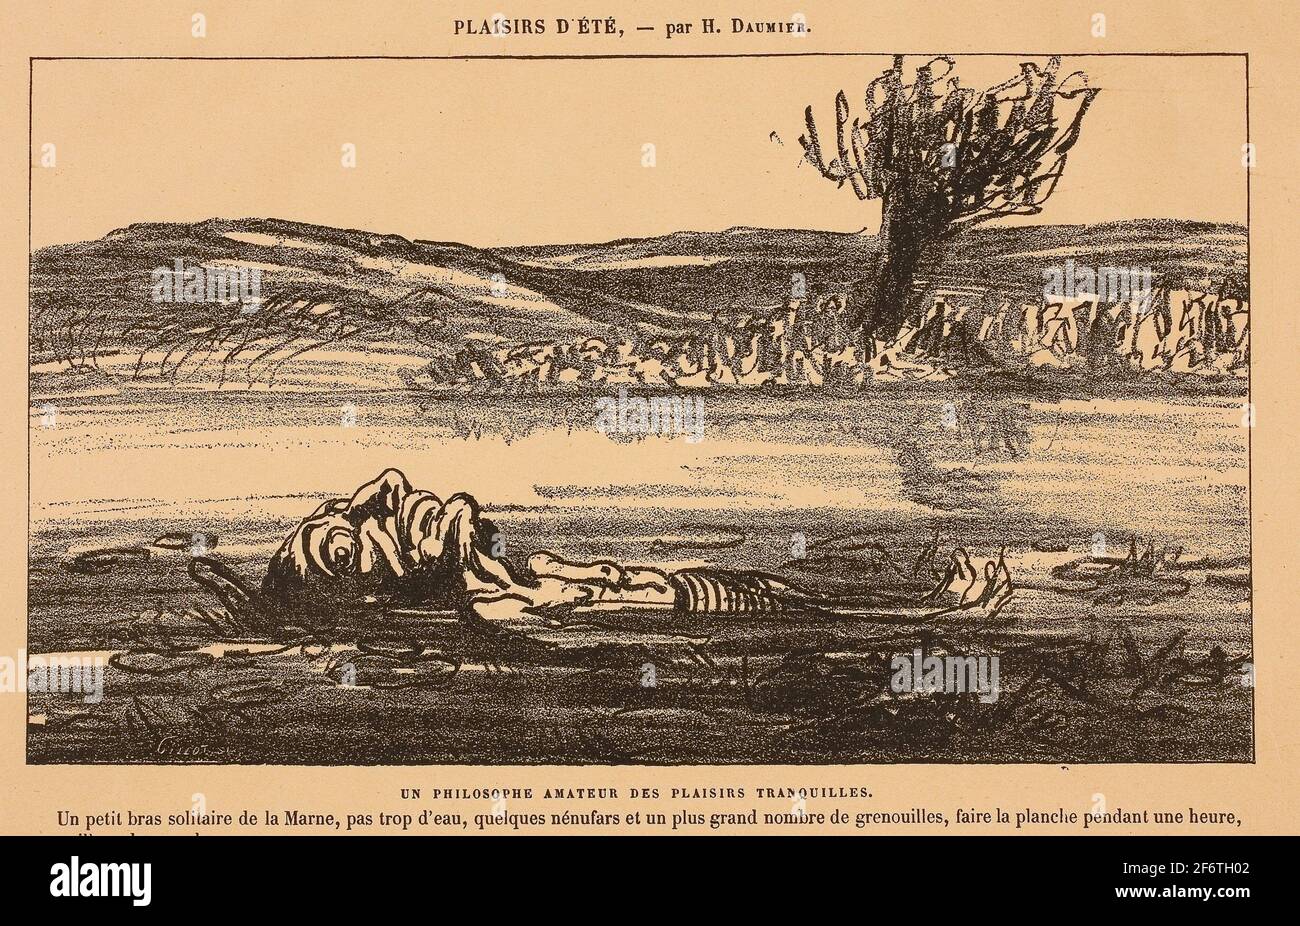 Author: Honor-Victorin Daumier. Philosophical Contemplations of a Lover of Silent Pleasures. To float on the back for an hour in a quiet tributary of Stock Photo